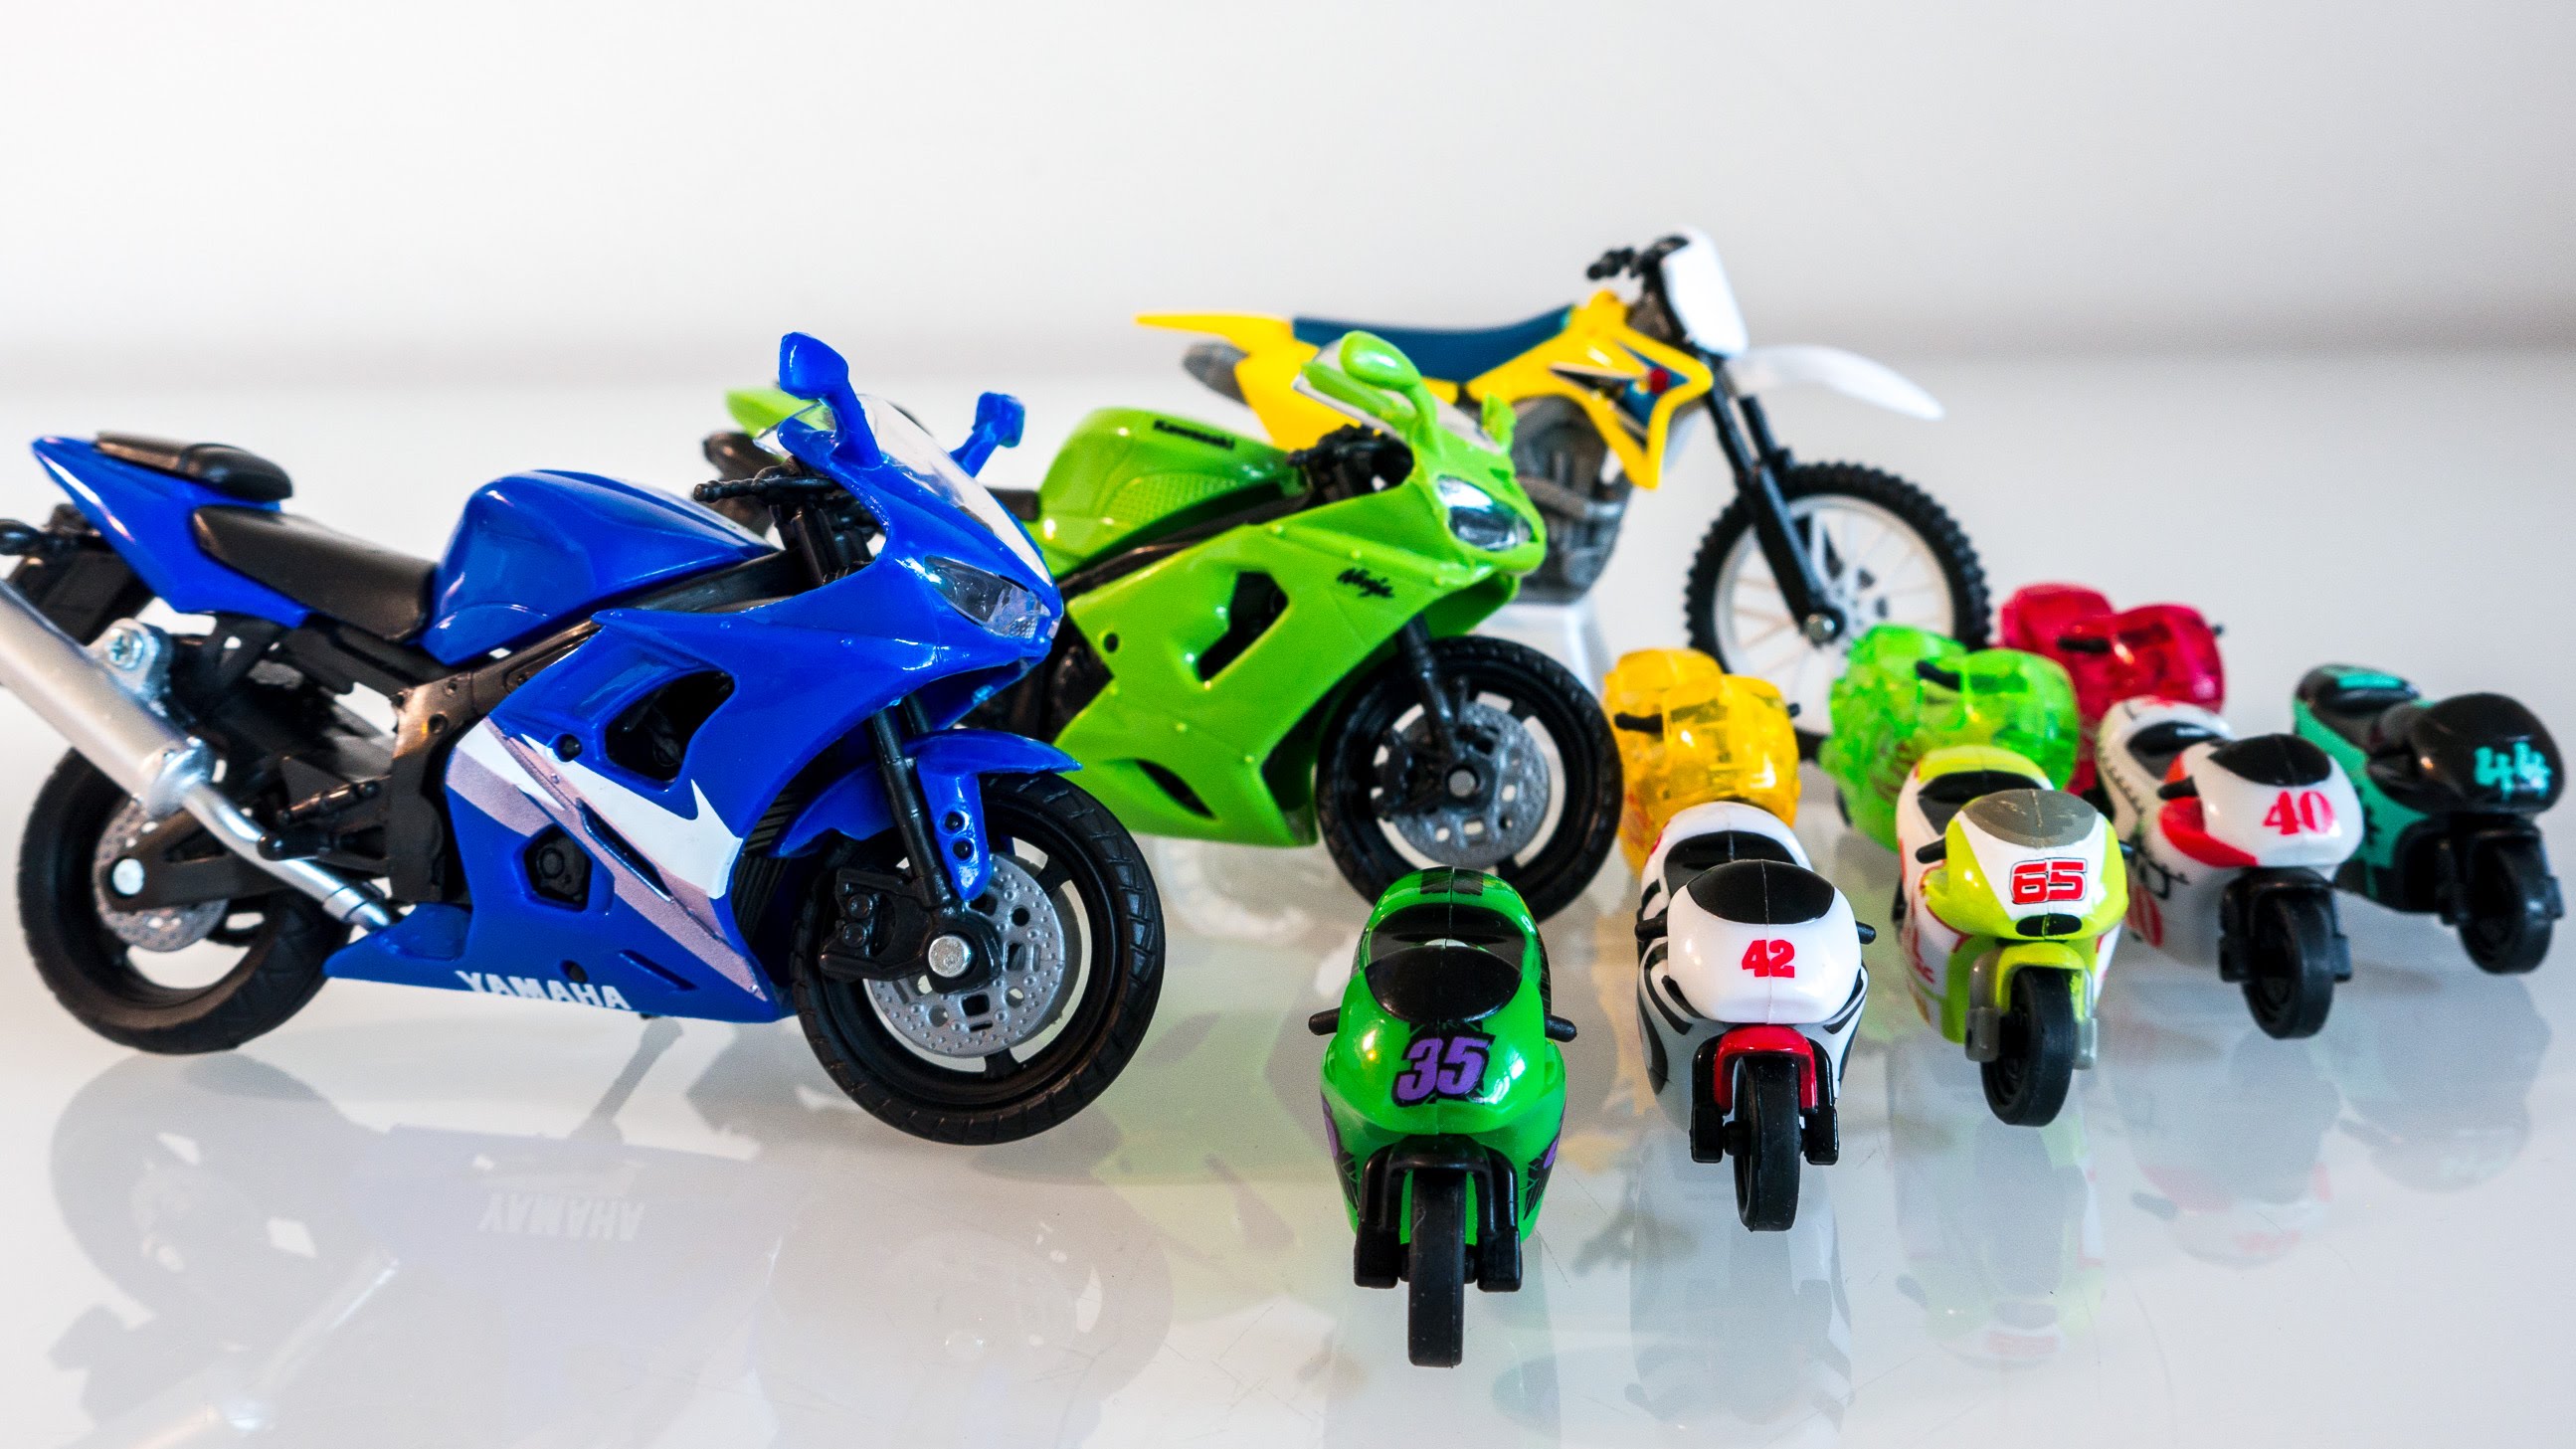 Toy Motorcycles for Kids| Toys & Games Video 오토바이 장난감 놀이 ...